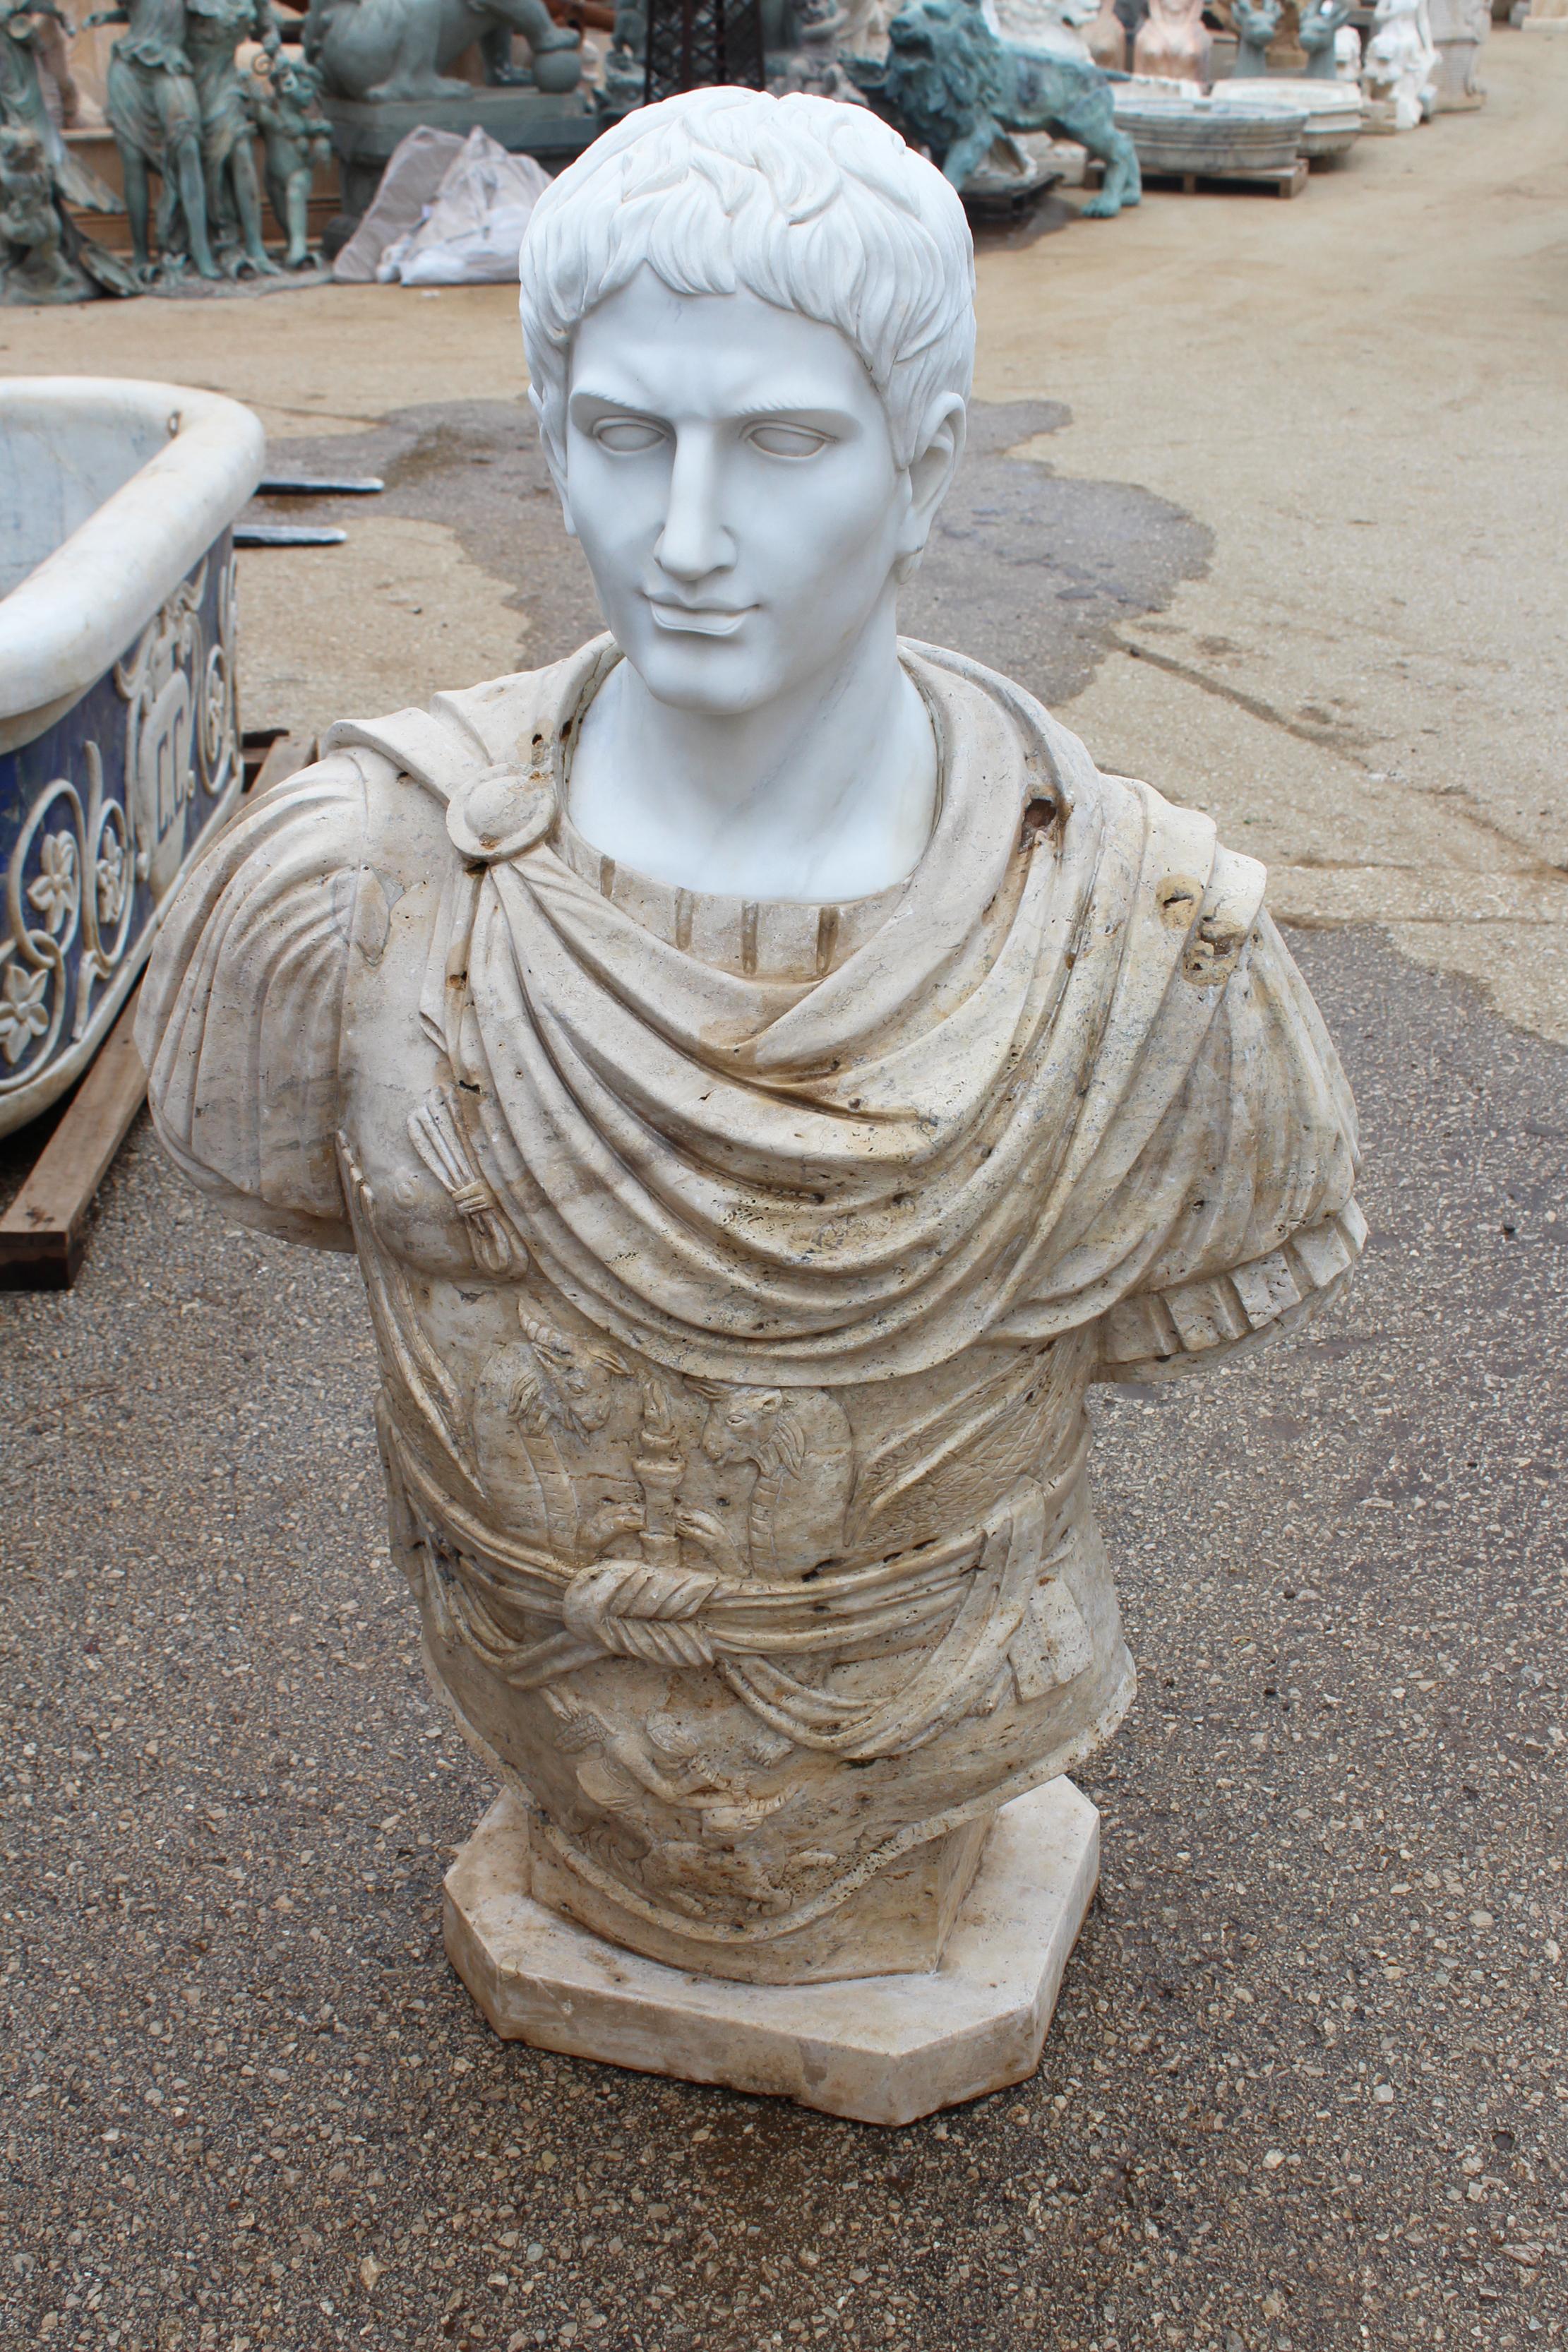 1990s bust of a Roman, hand carved by craftsmen using white marble for the head and travertine marble on the toga, where the white veins give movement and realism to the cloth.